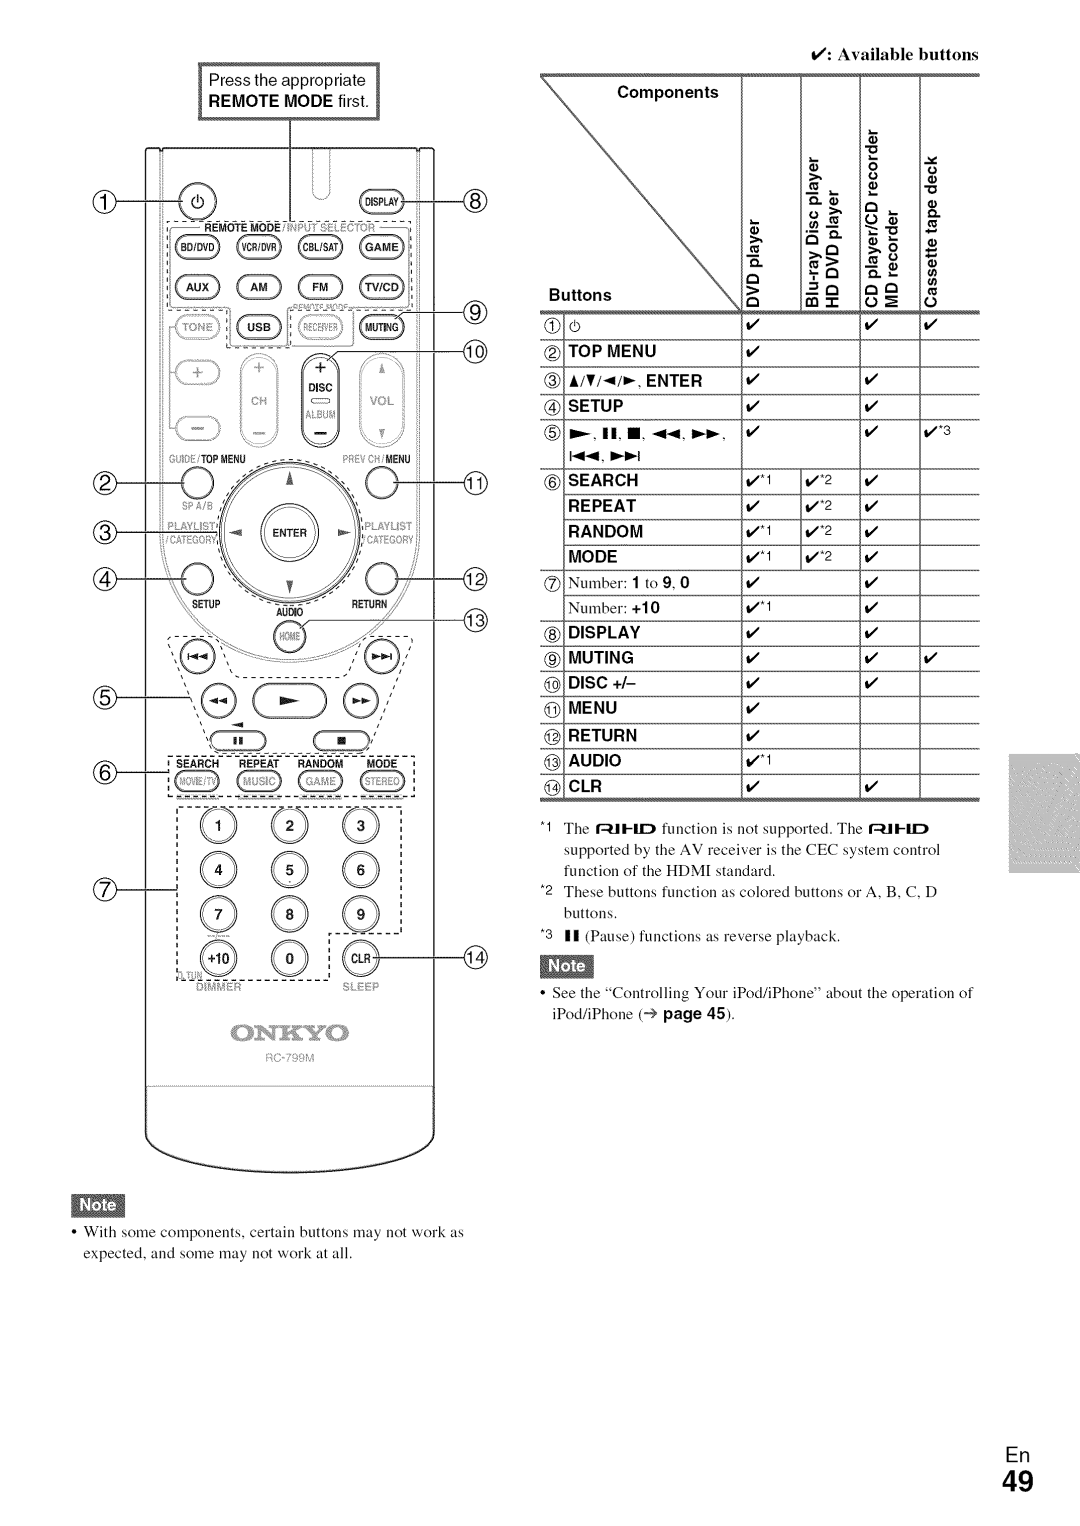 Onkyo HT-R590 instruction manual a ;,y. _>, qD @, _: Available buttons, REMOTEPress the appropriateMODE first 